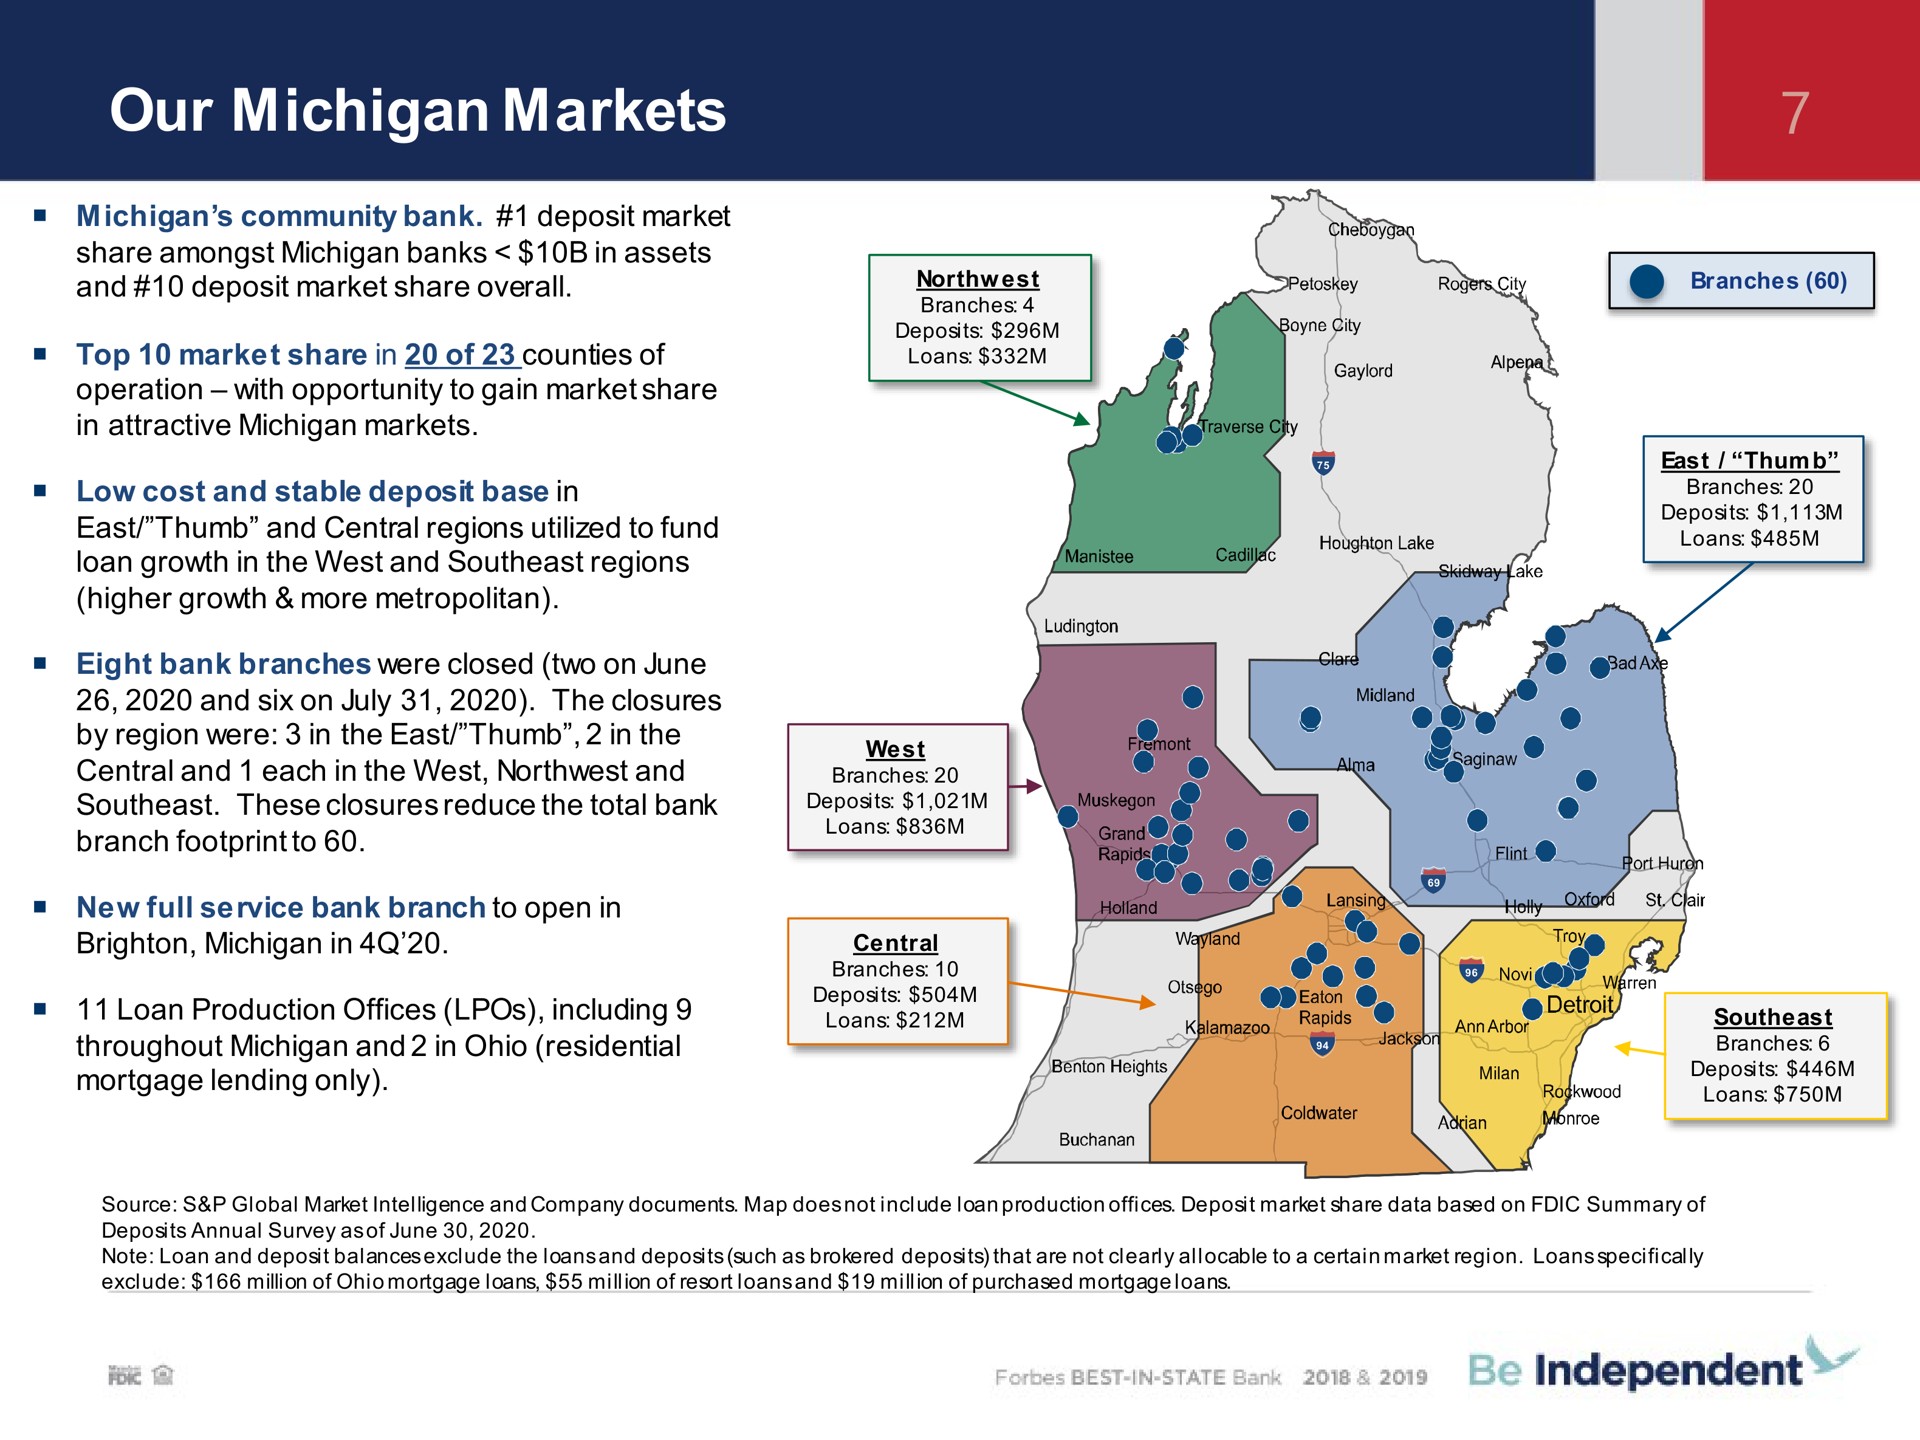 our michigan markets | Independent Bank Corp